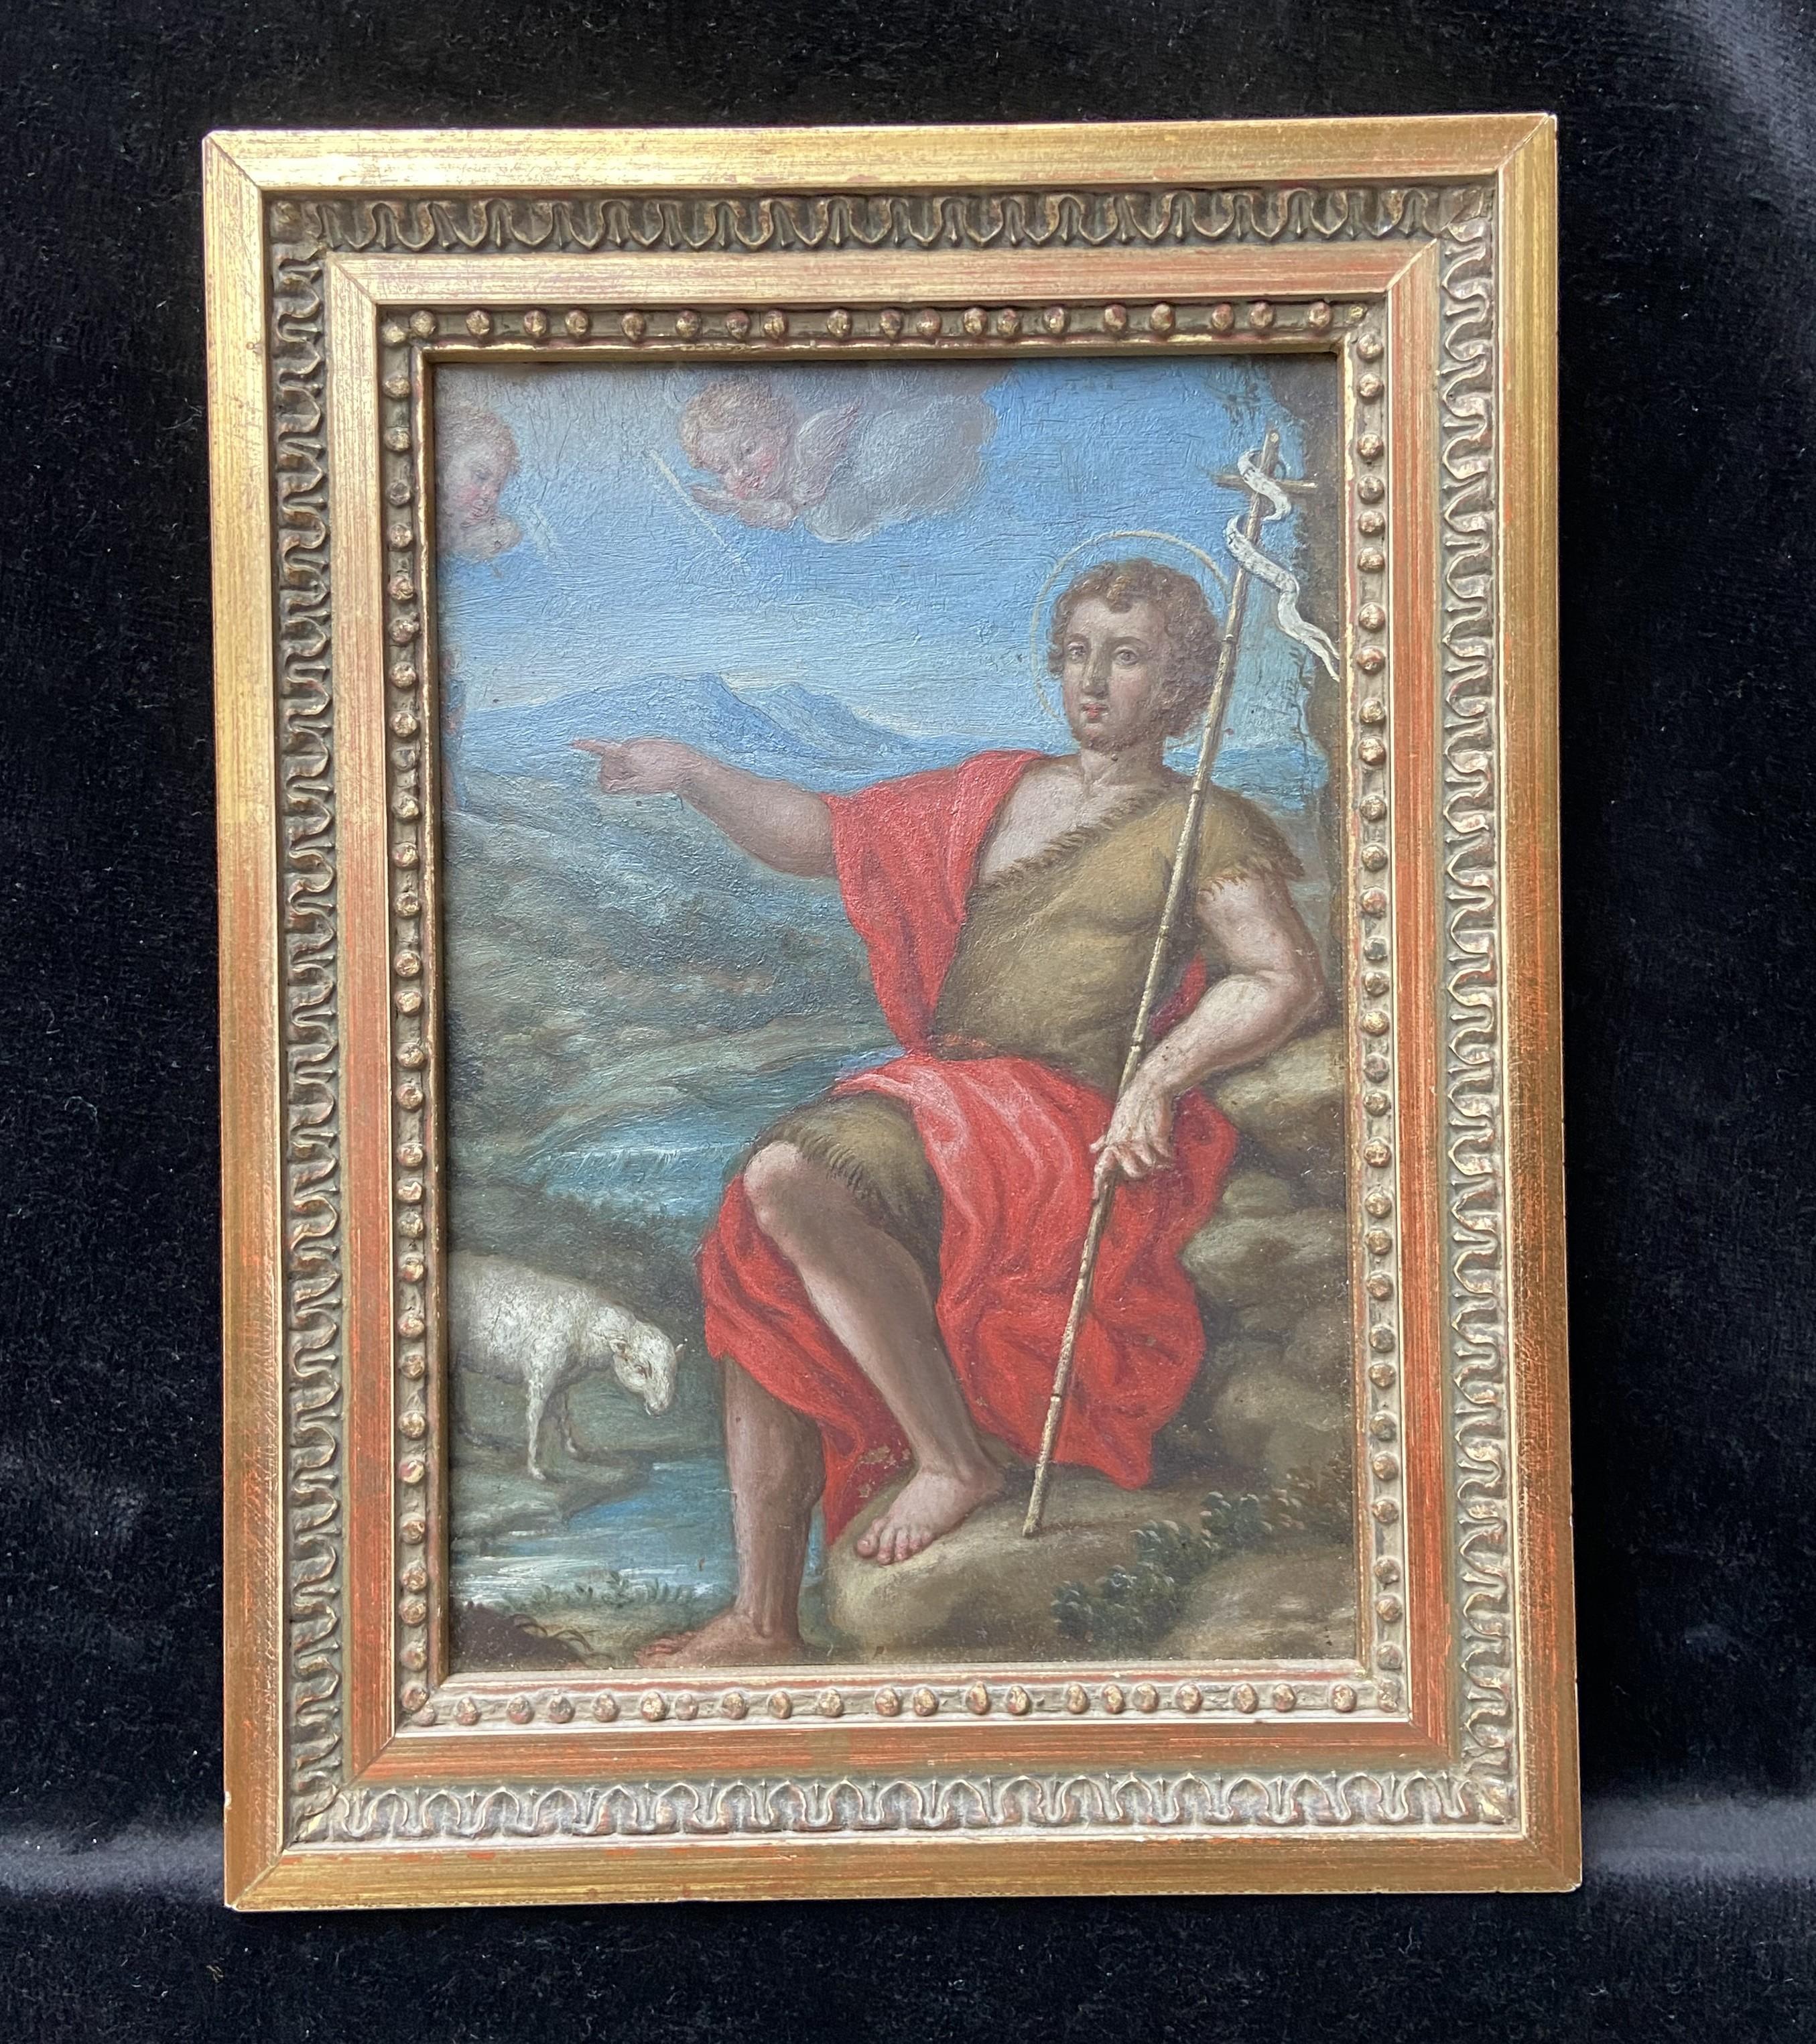 17th Century French School
Saint John the Baptist in a landscape
oil on copper
17 x 11.5 cm
In good condition except very small loss of painting in the lower left  part
In a modern frame : 21.8 x 16.5 cm

This small painting is an interesting and